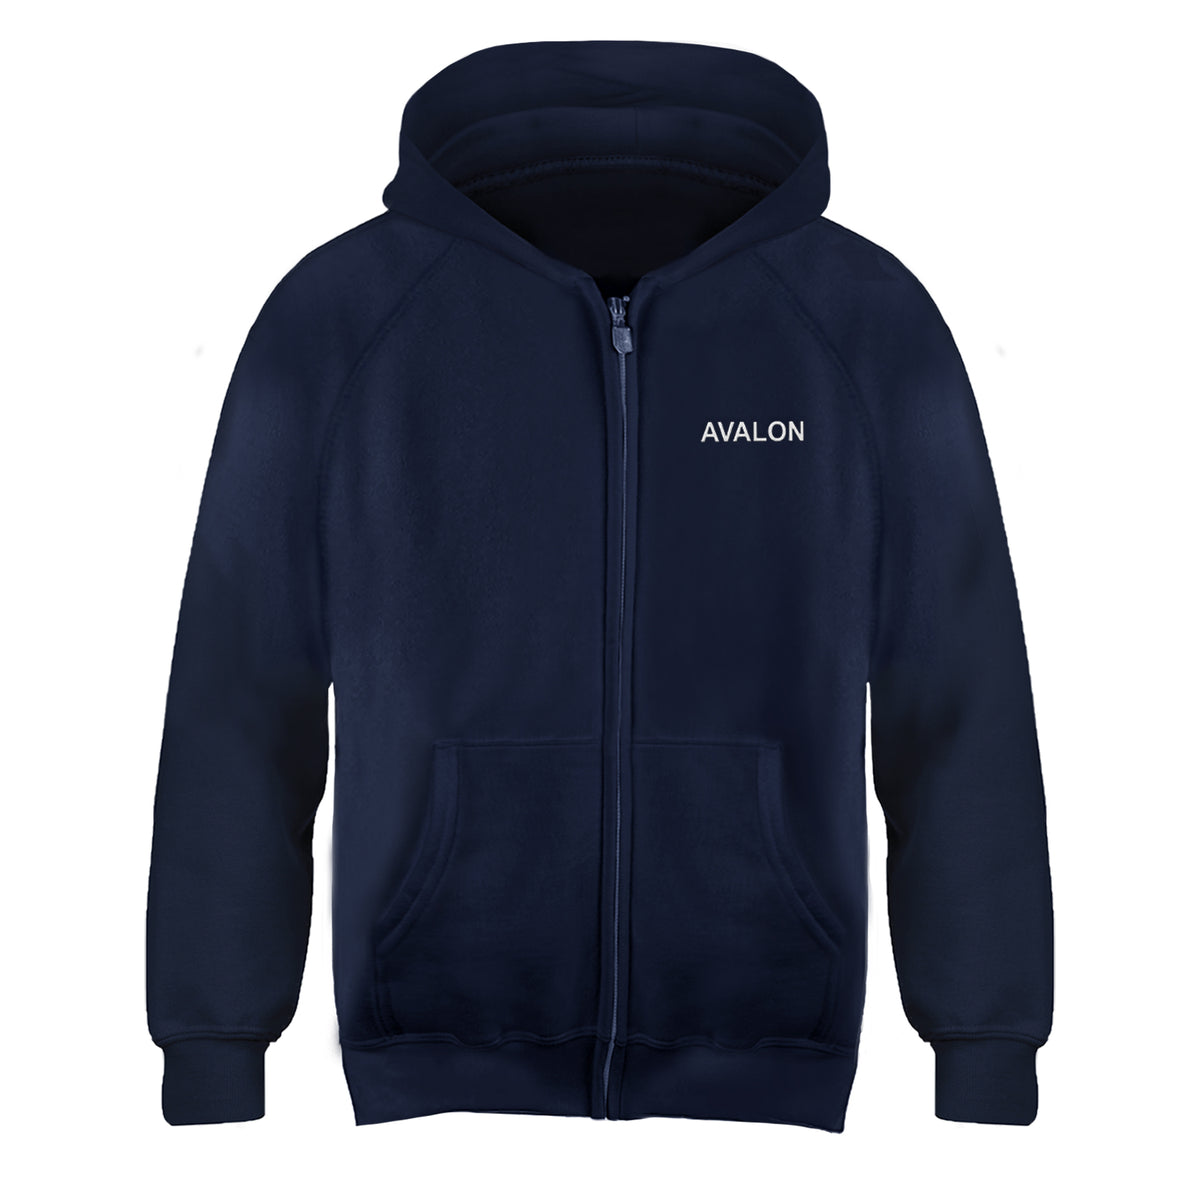 AVALON ZIP HOODIE, YOUTH